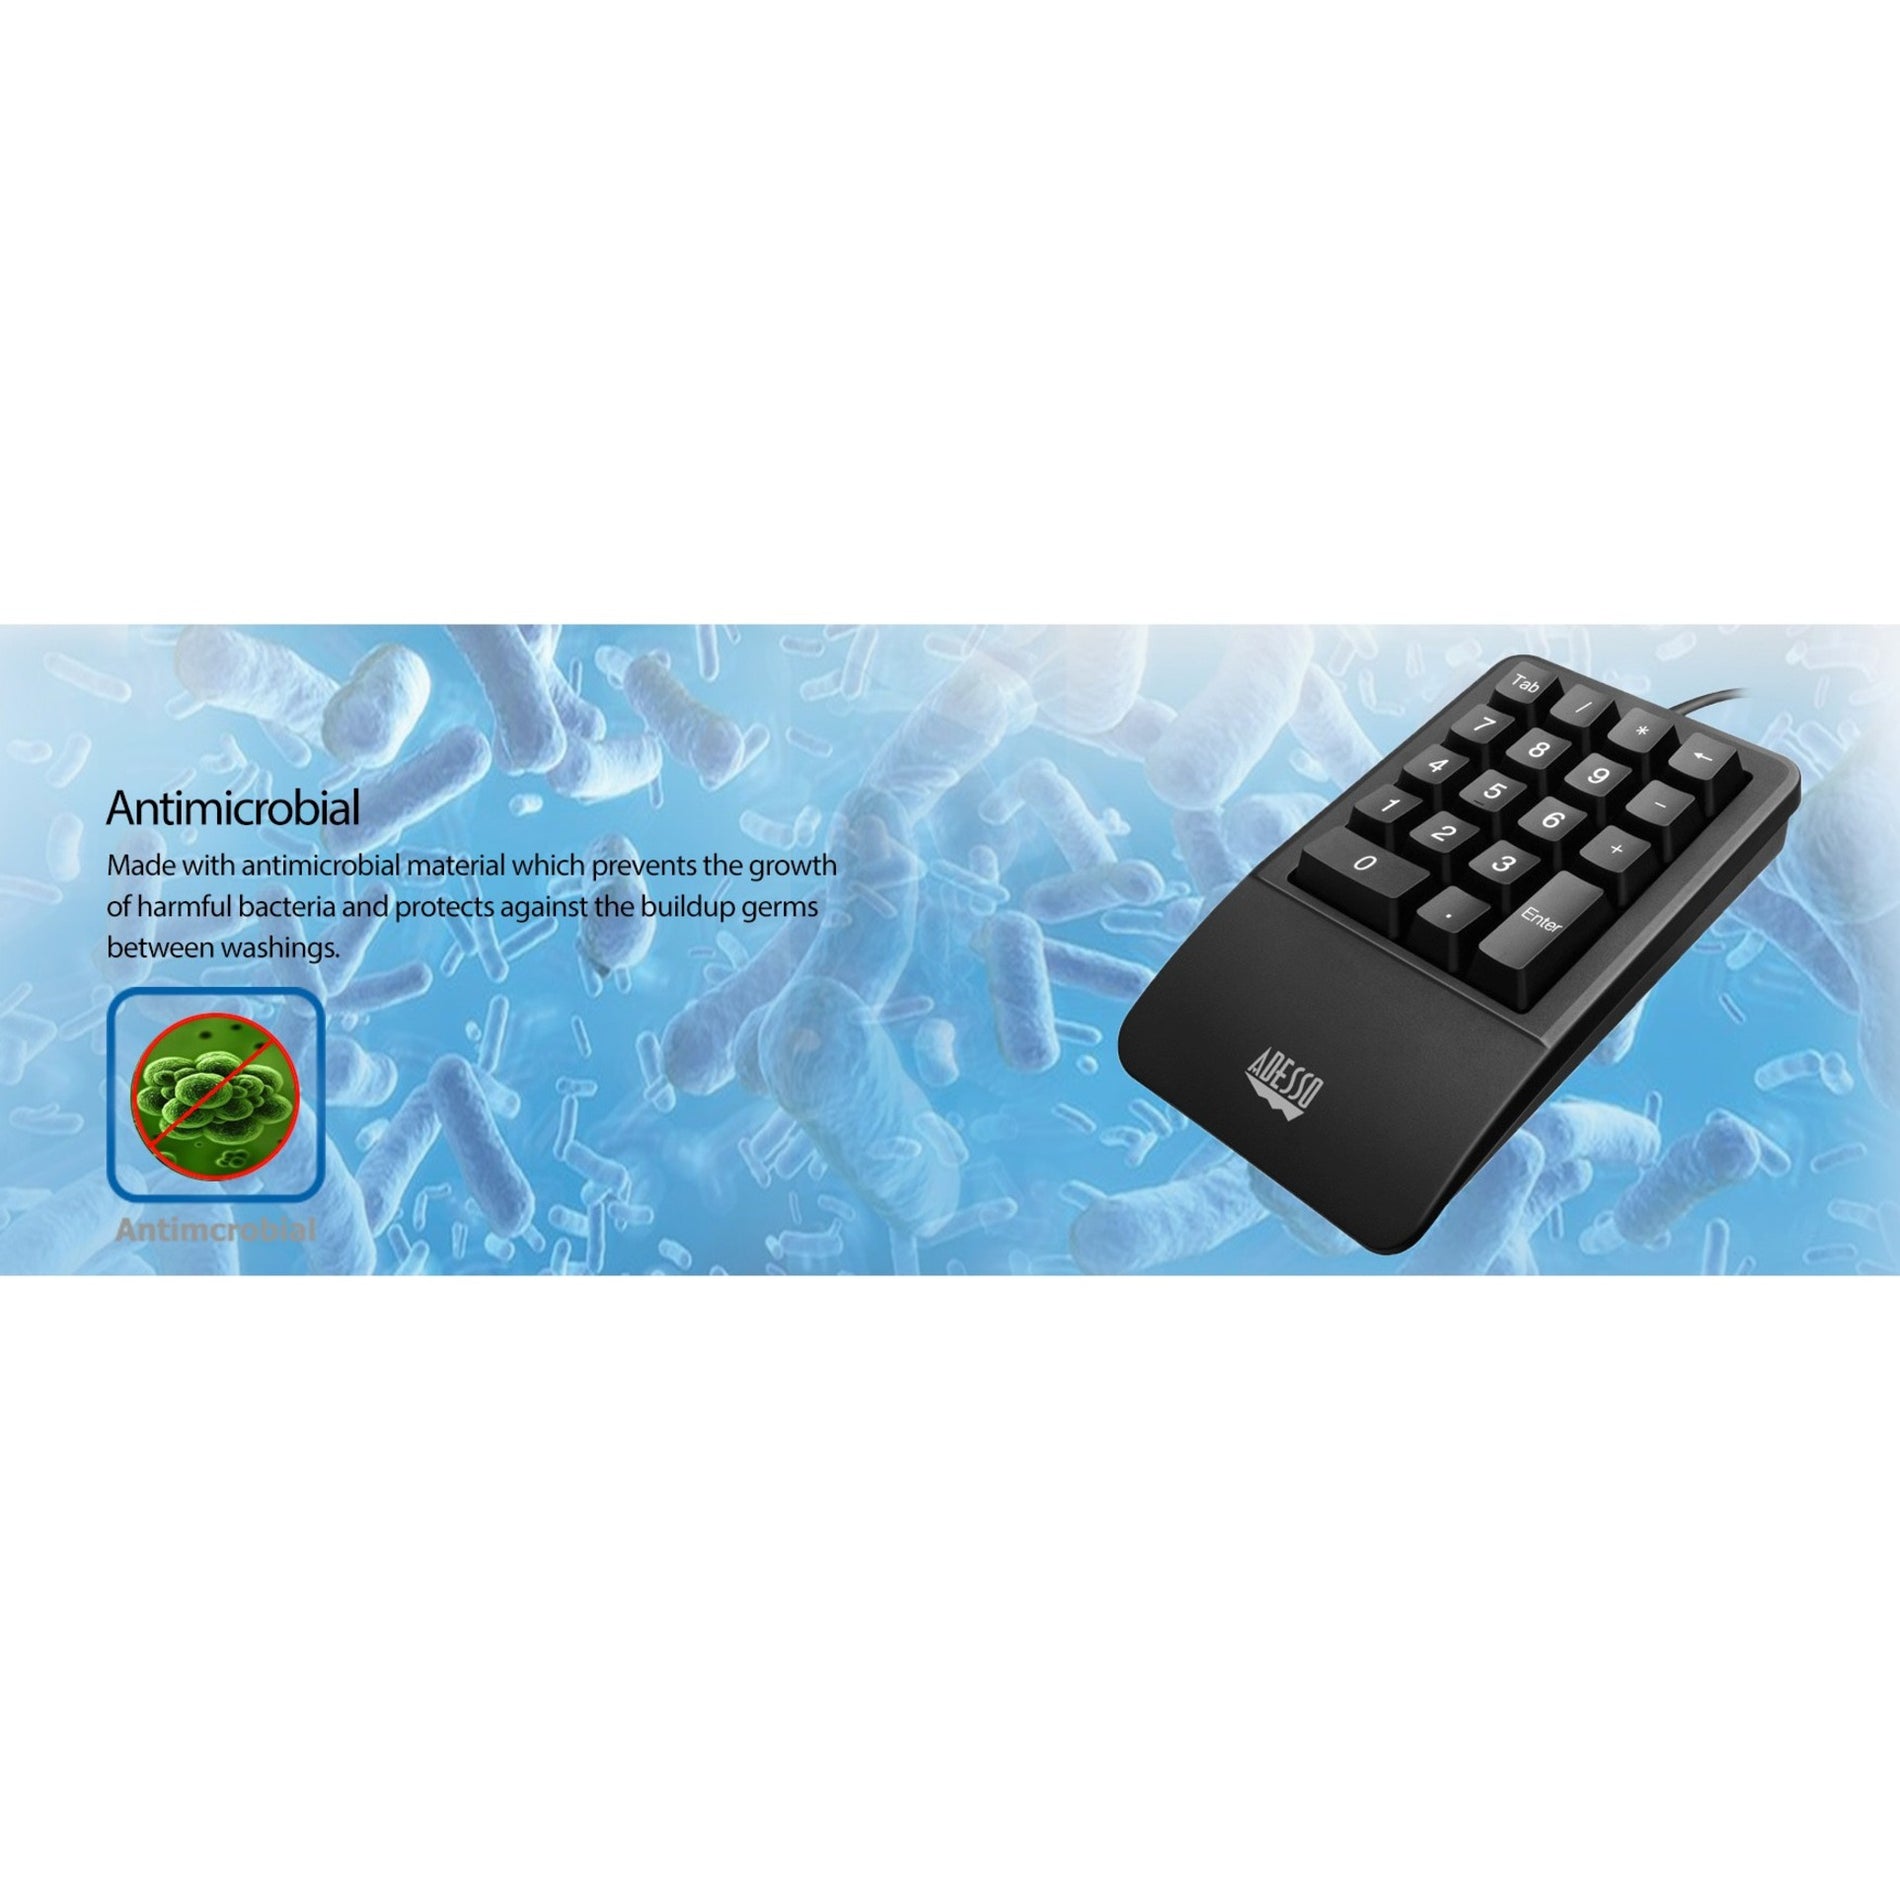 Adesso AKB-618UB Antimicrobial Waterproof Numeric Keypad with Wrist Rest Support, Ergonomic Design, Spill Proof, and Quiet Keys